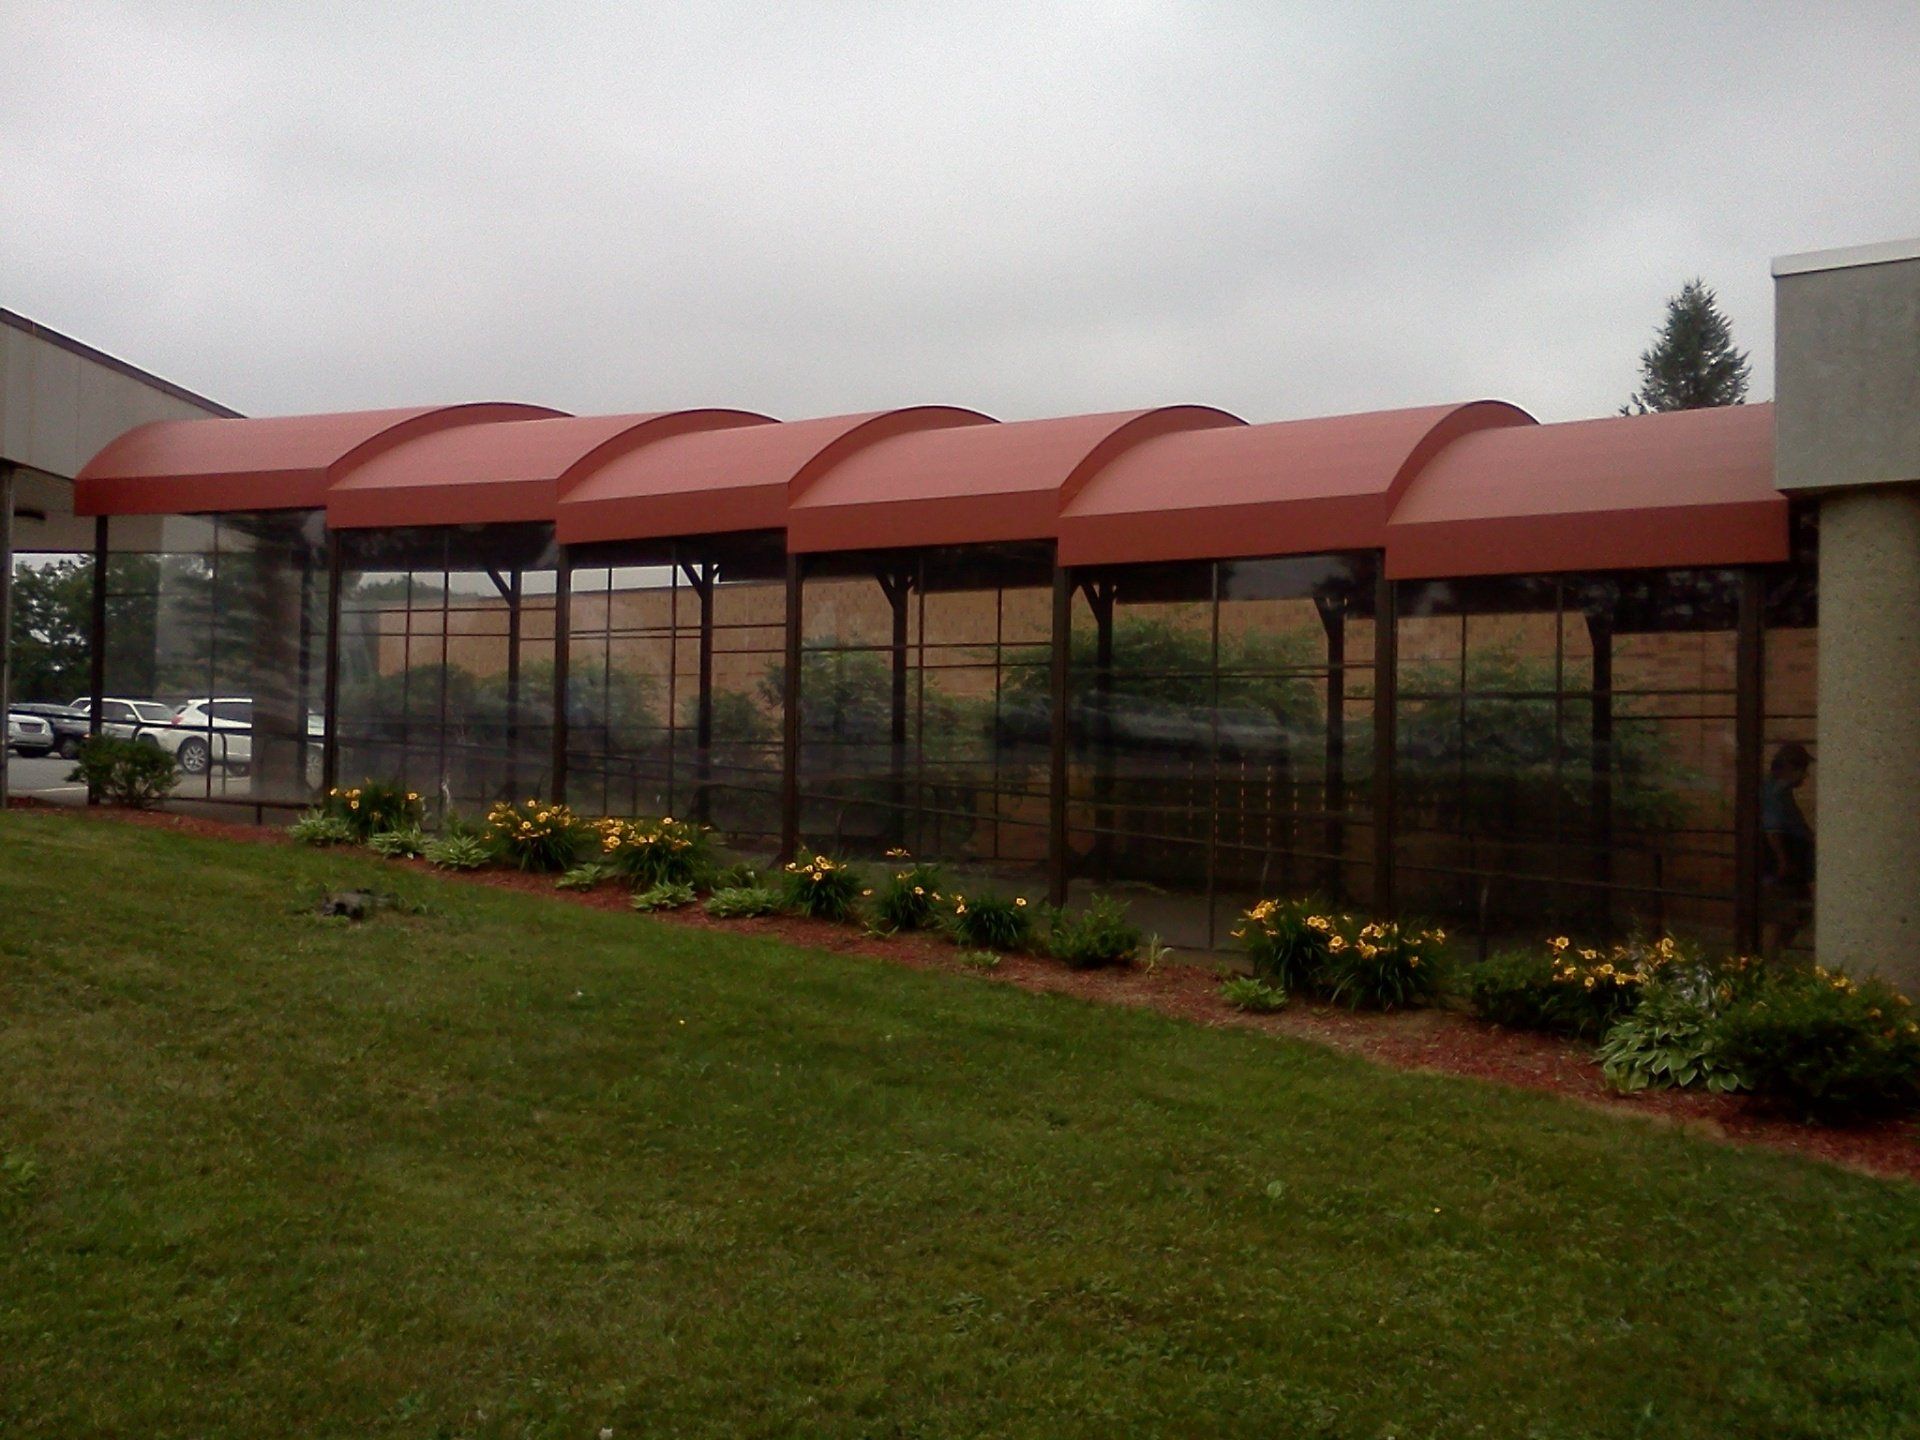 Commercial awning-15 — Custom awnings in Pittsburgh, PA